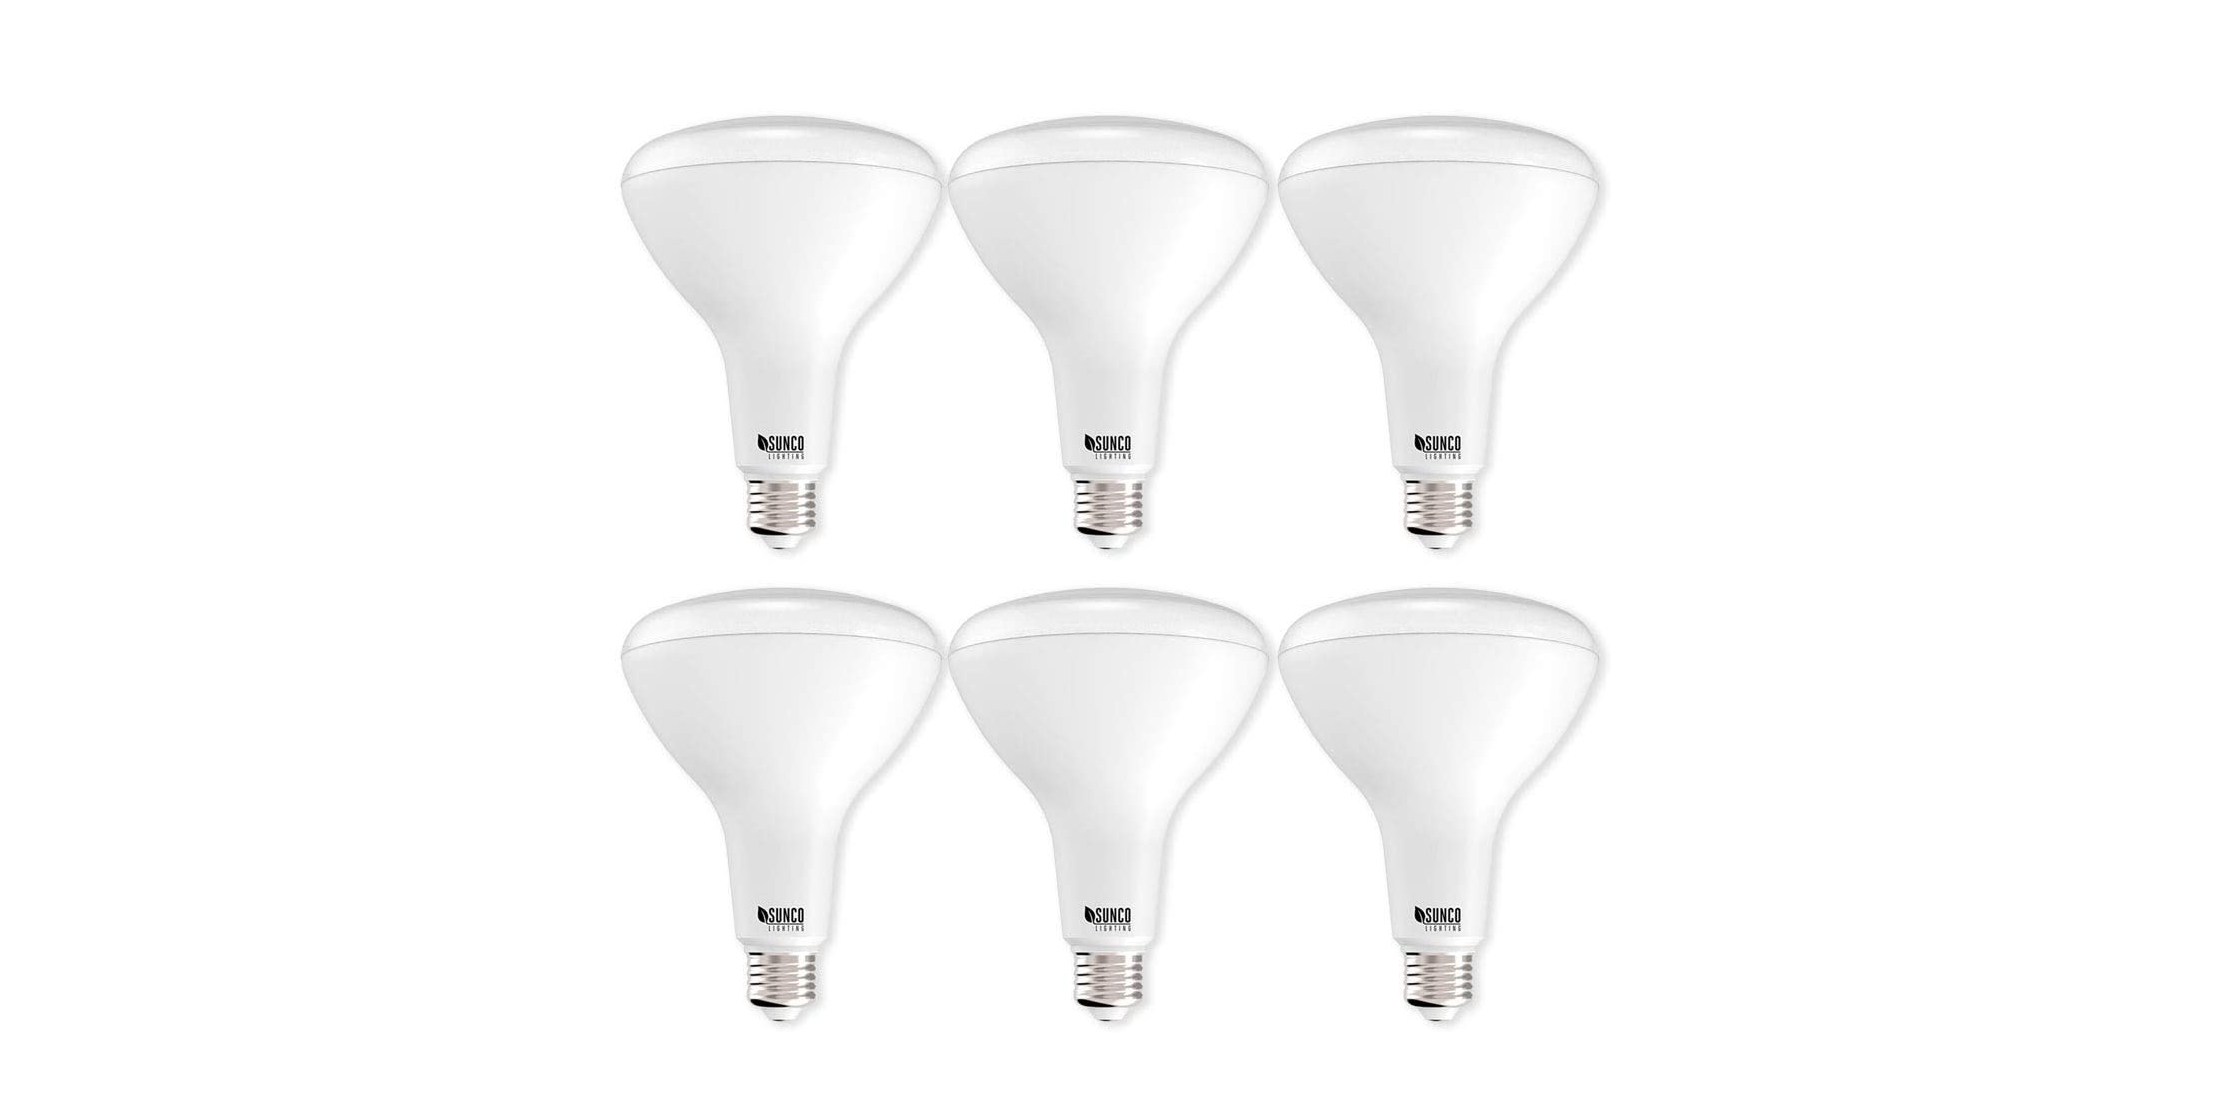 Green Deals: 6-pack 100W Dimmable BR40 LED Light Bulbs $30, more